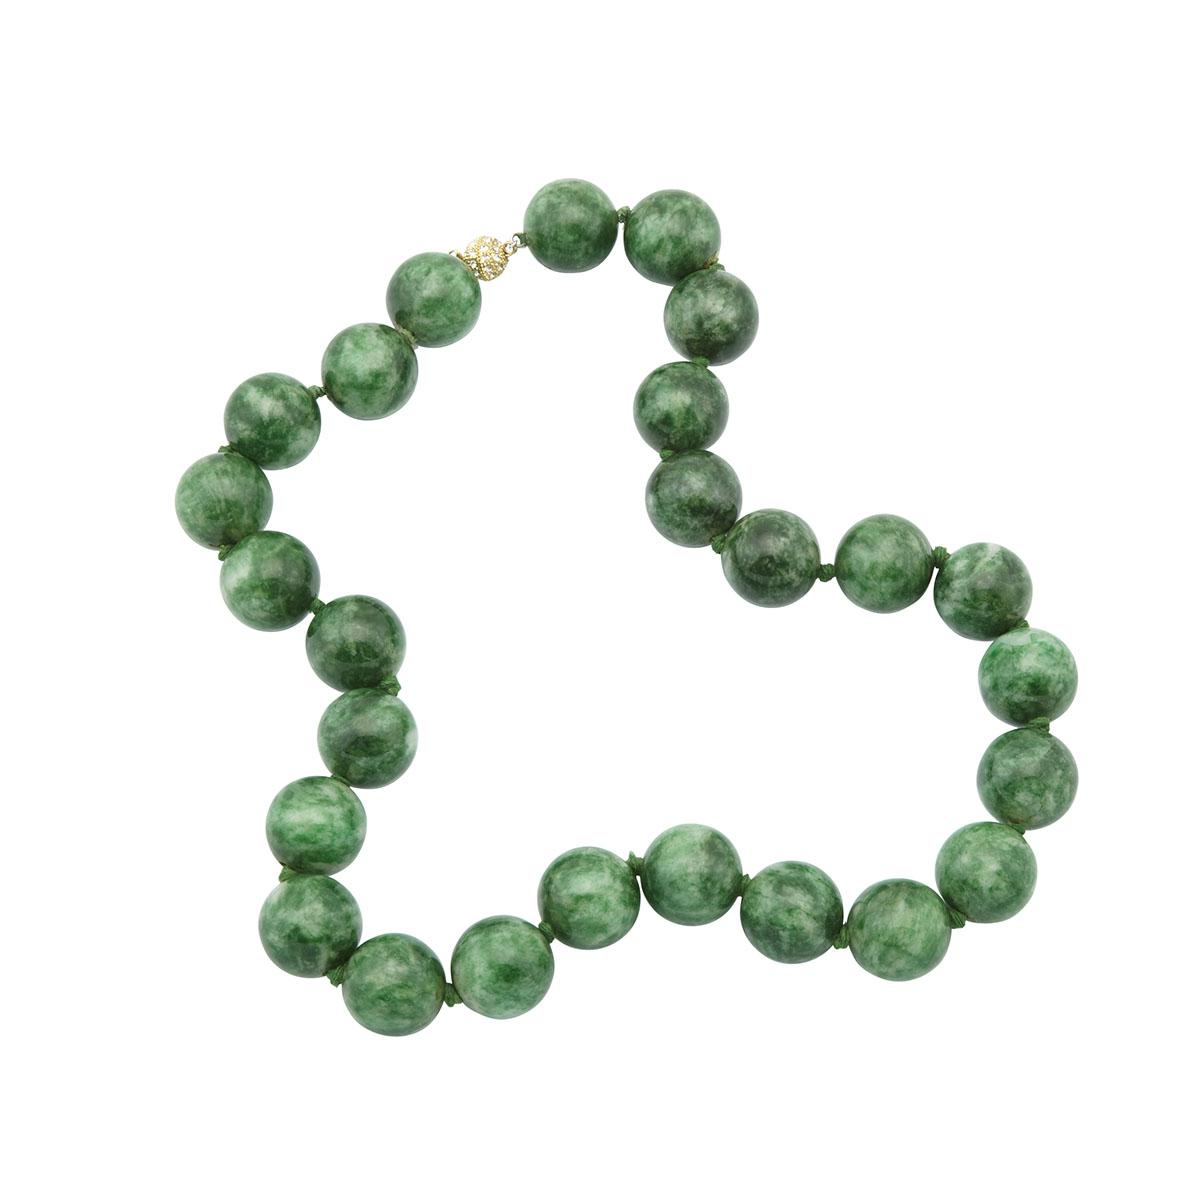 SINGLE STRAND OF LARGE JADEITE BEADScomposed of 26 beads (24.0mm to 25.0mm) and completed with a